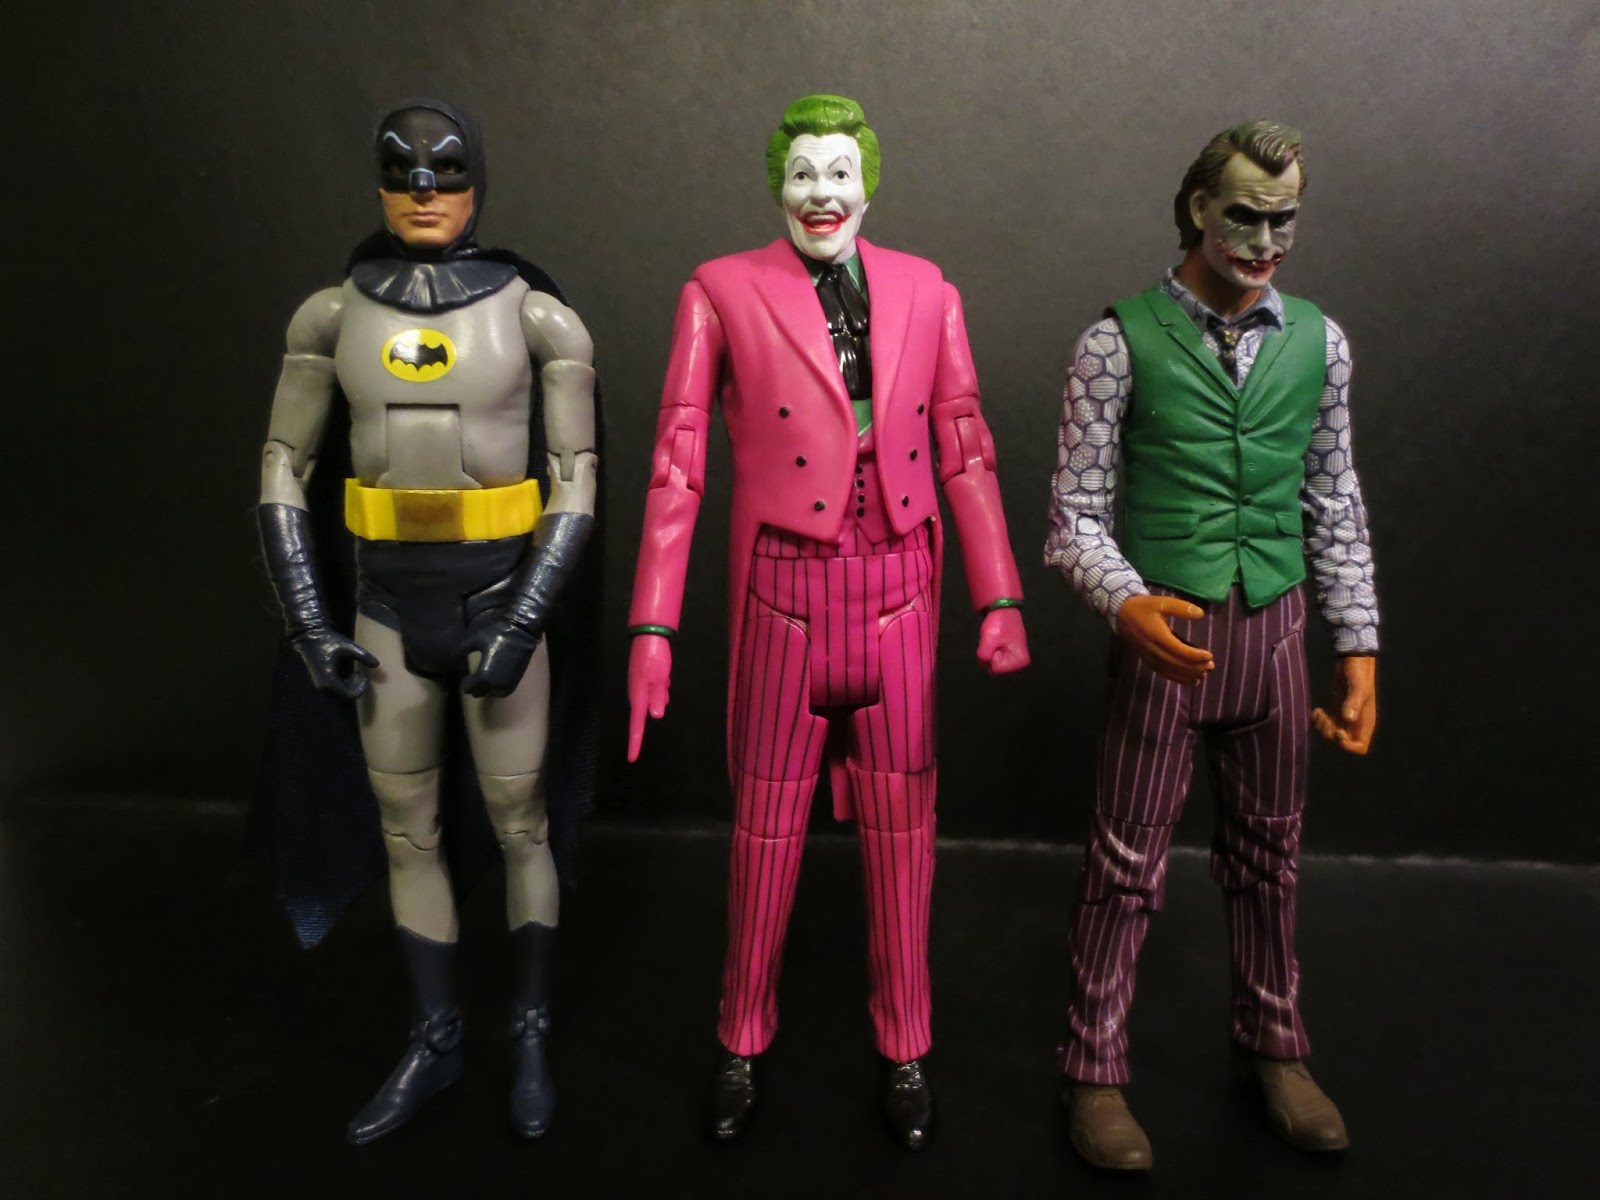 Action Figure Review: The Joker from Batman Classic TV Series by Mattel